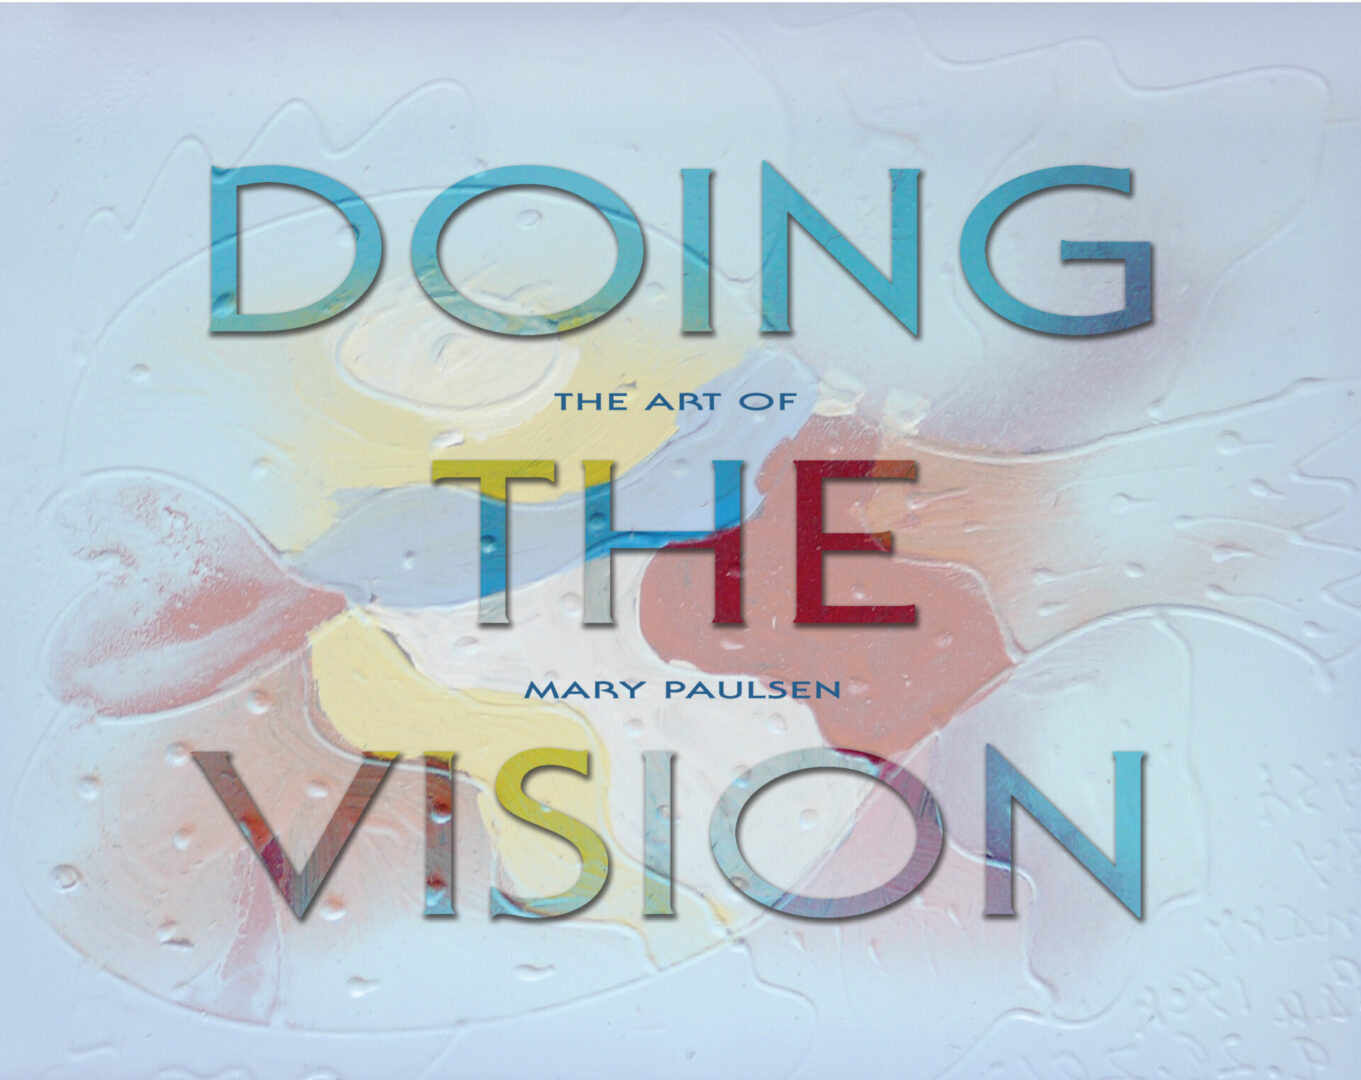 A book cover with the title of doing the vision.